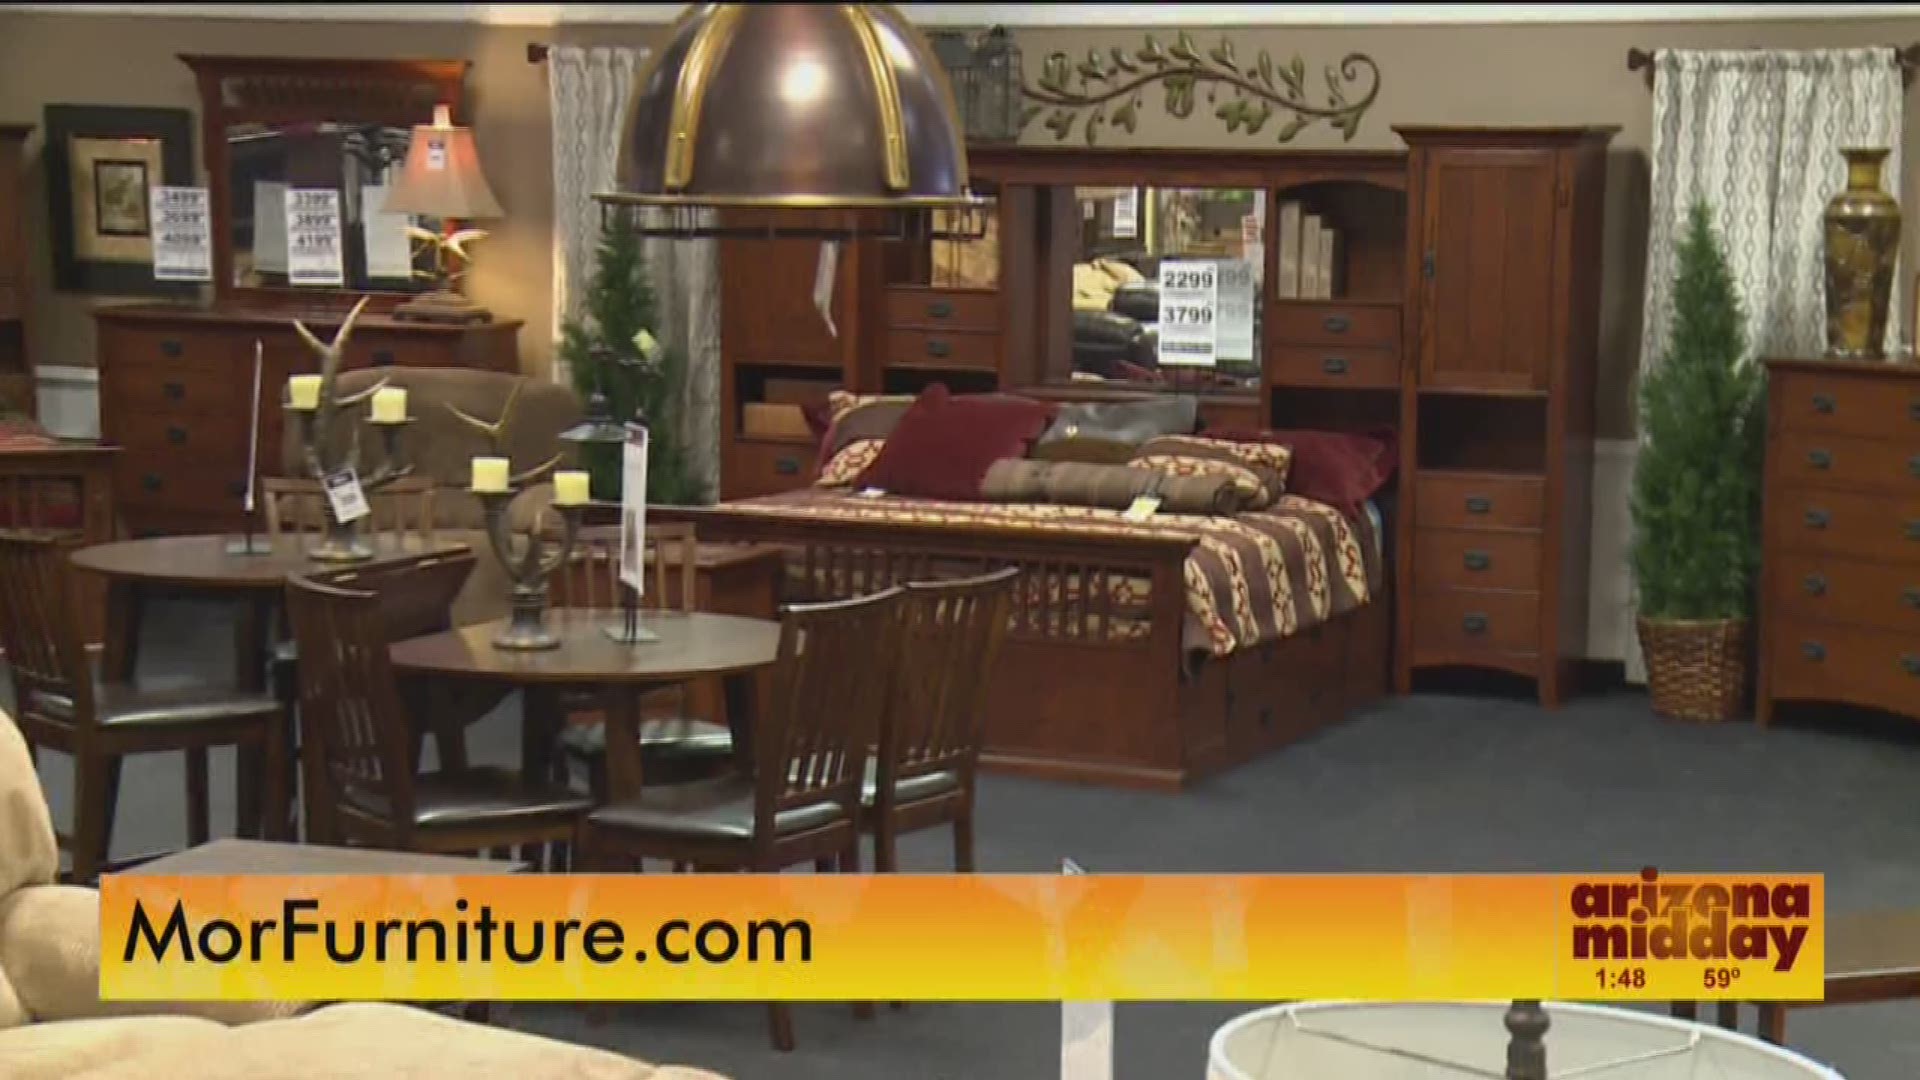 Mor Furniture has great options to choose from, along with a family-friendly environment.